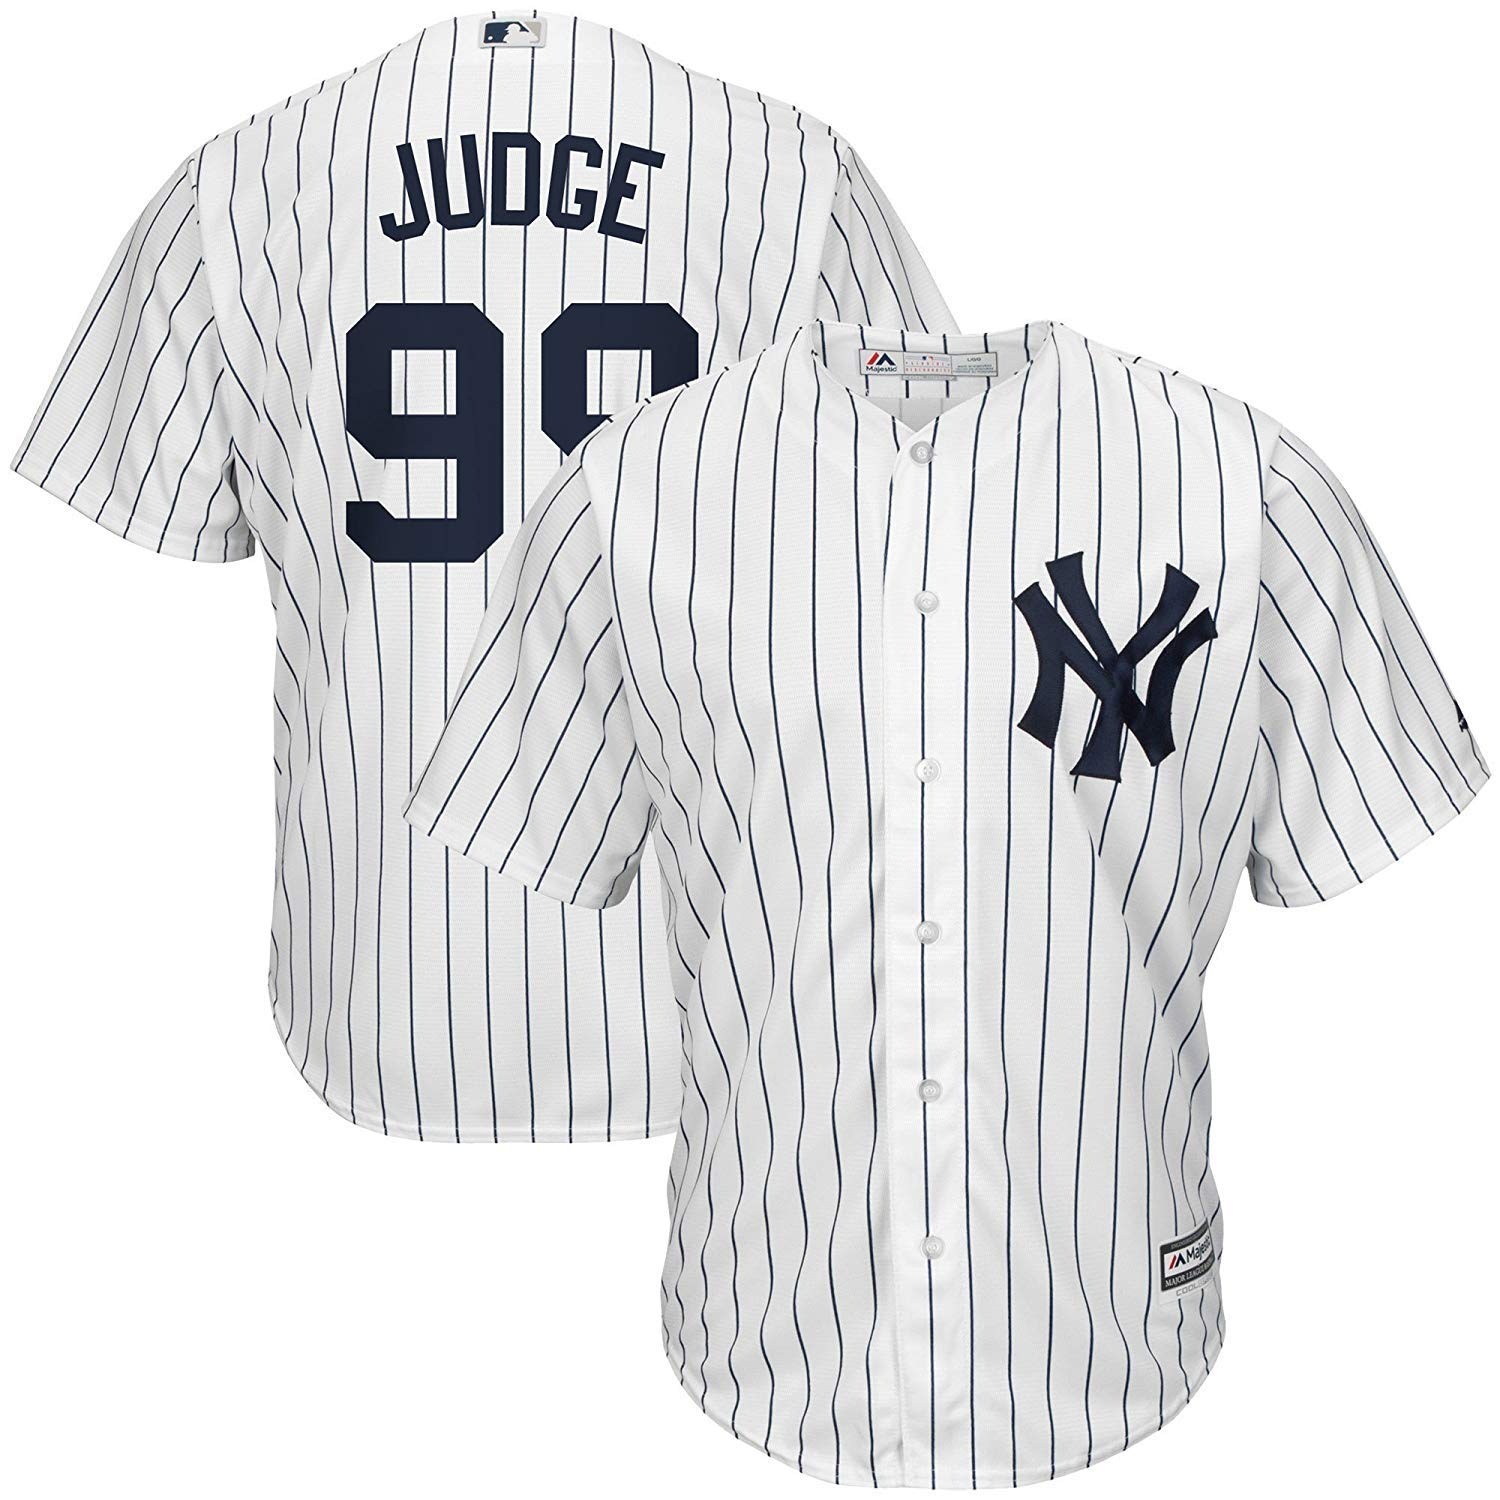 Aaron Judge All-Star Game MLB Fan Jerseys for sale